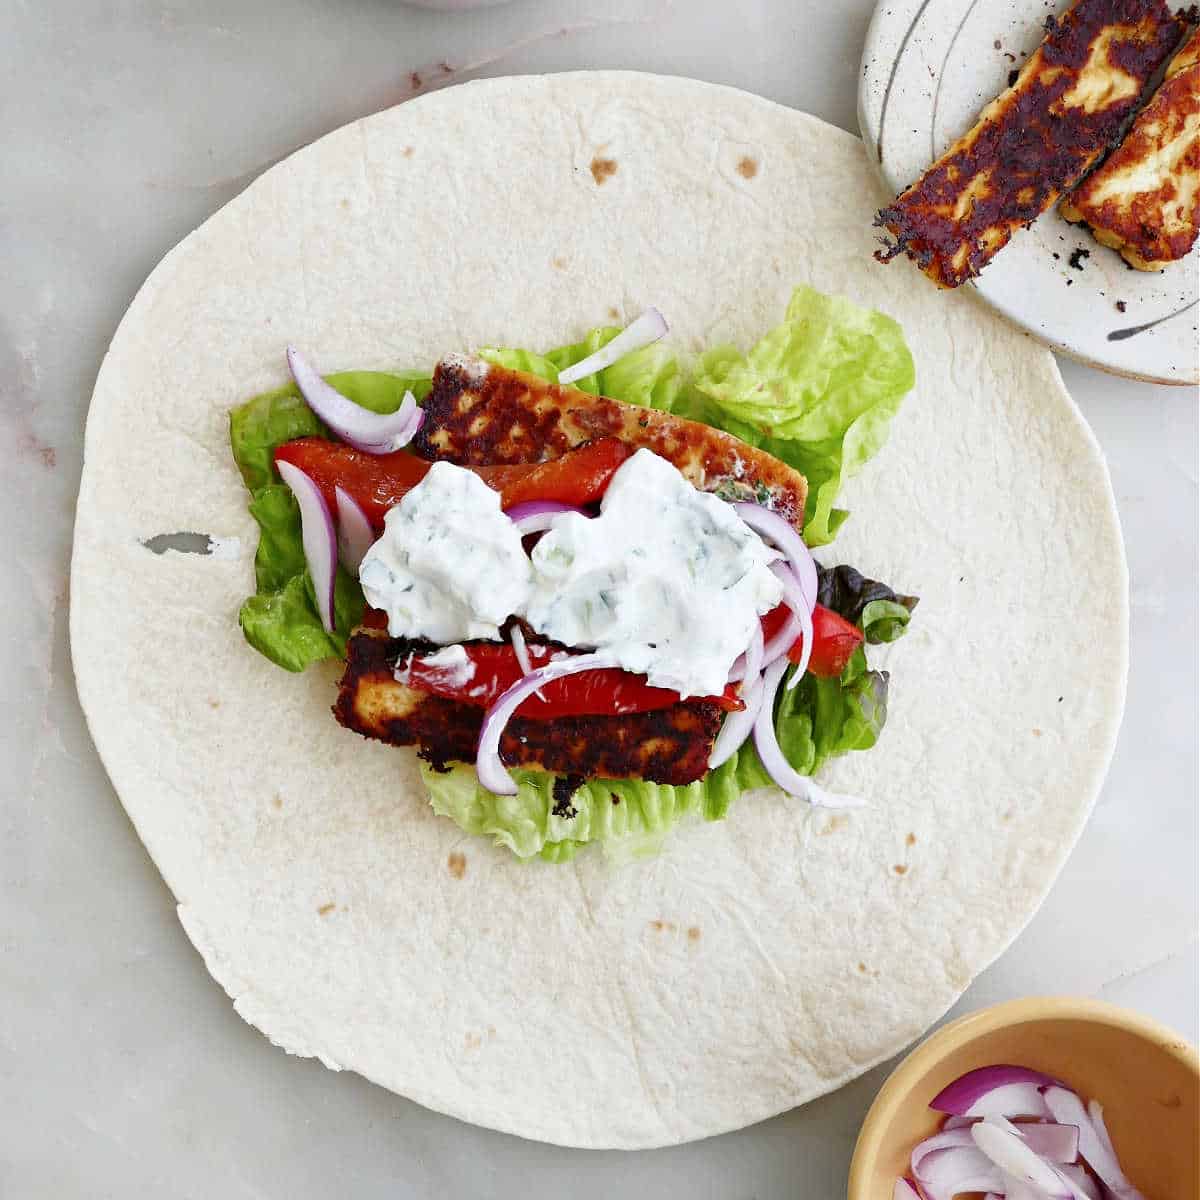 halloumi and vegetables with yogurt sauce on a tortilla before being rolled into a wrap